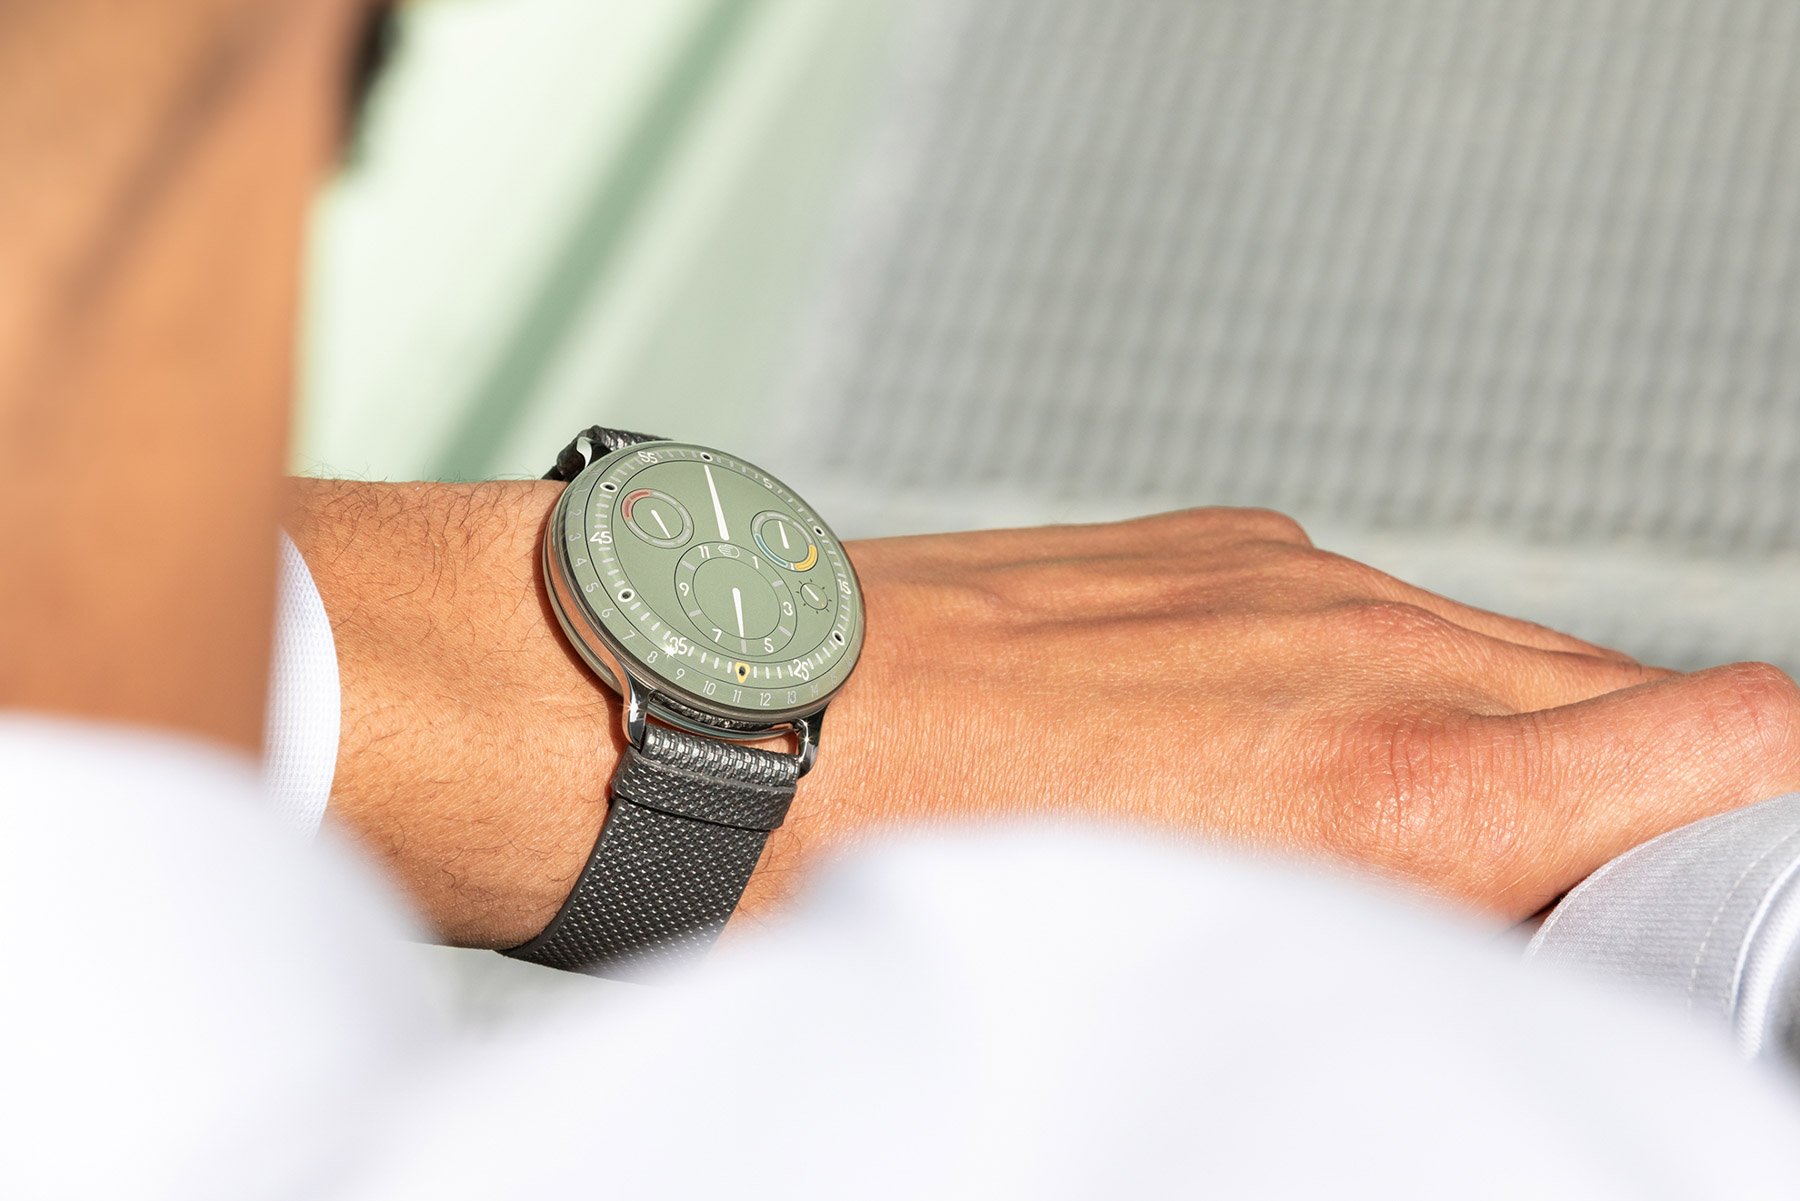 Introducing: The Ressence Type 3 EE ? An Impressive Oil-Filled Eucalyptus-Green Pebble For The Wrist